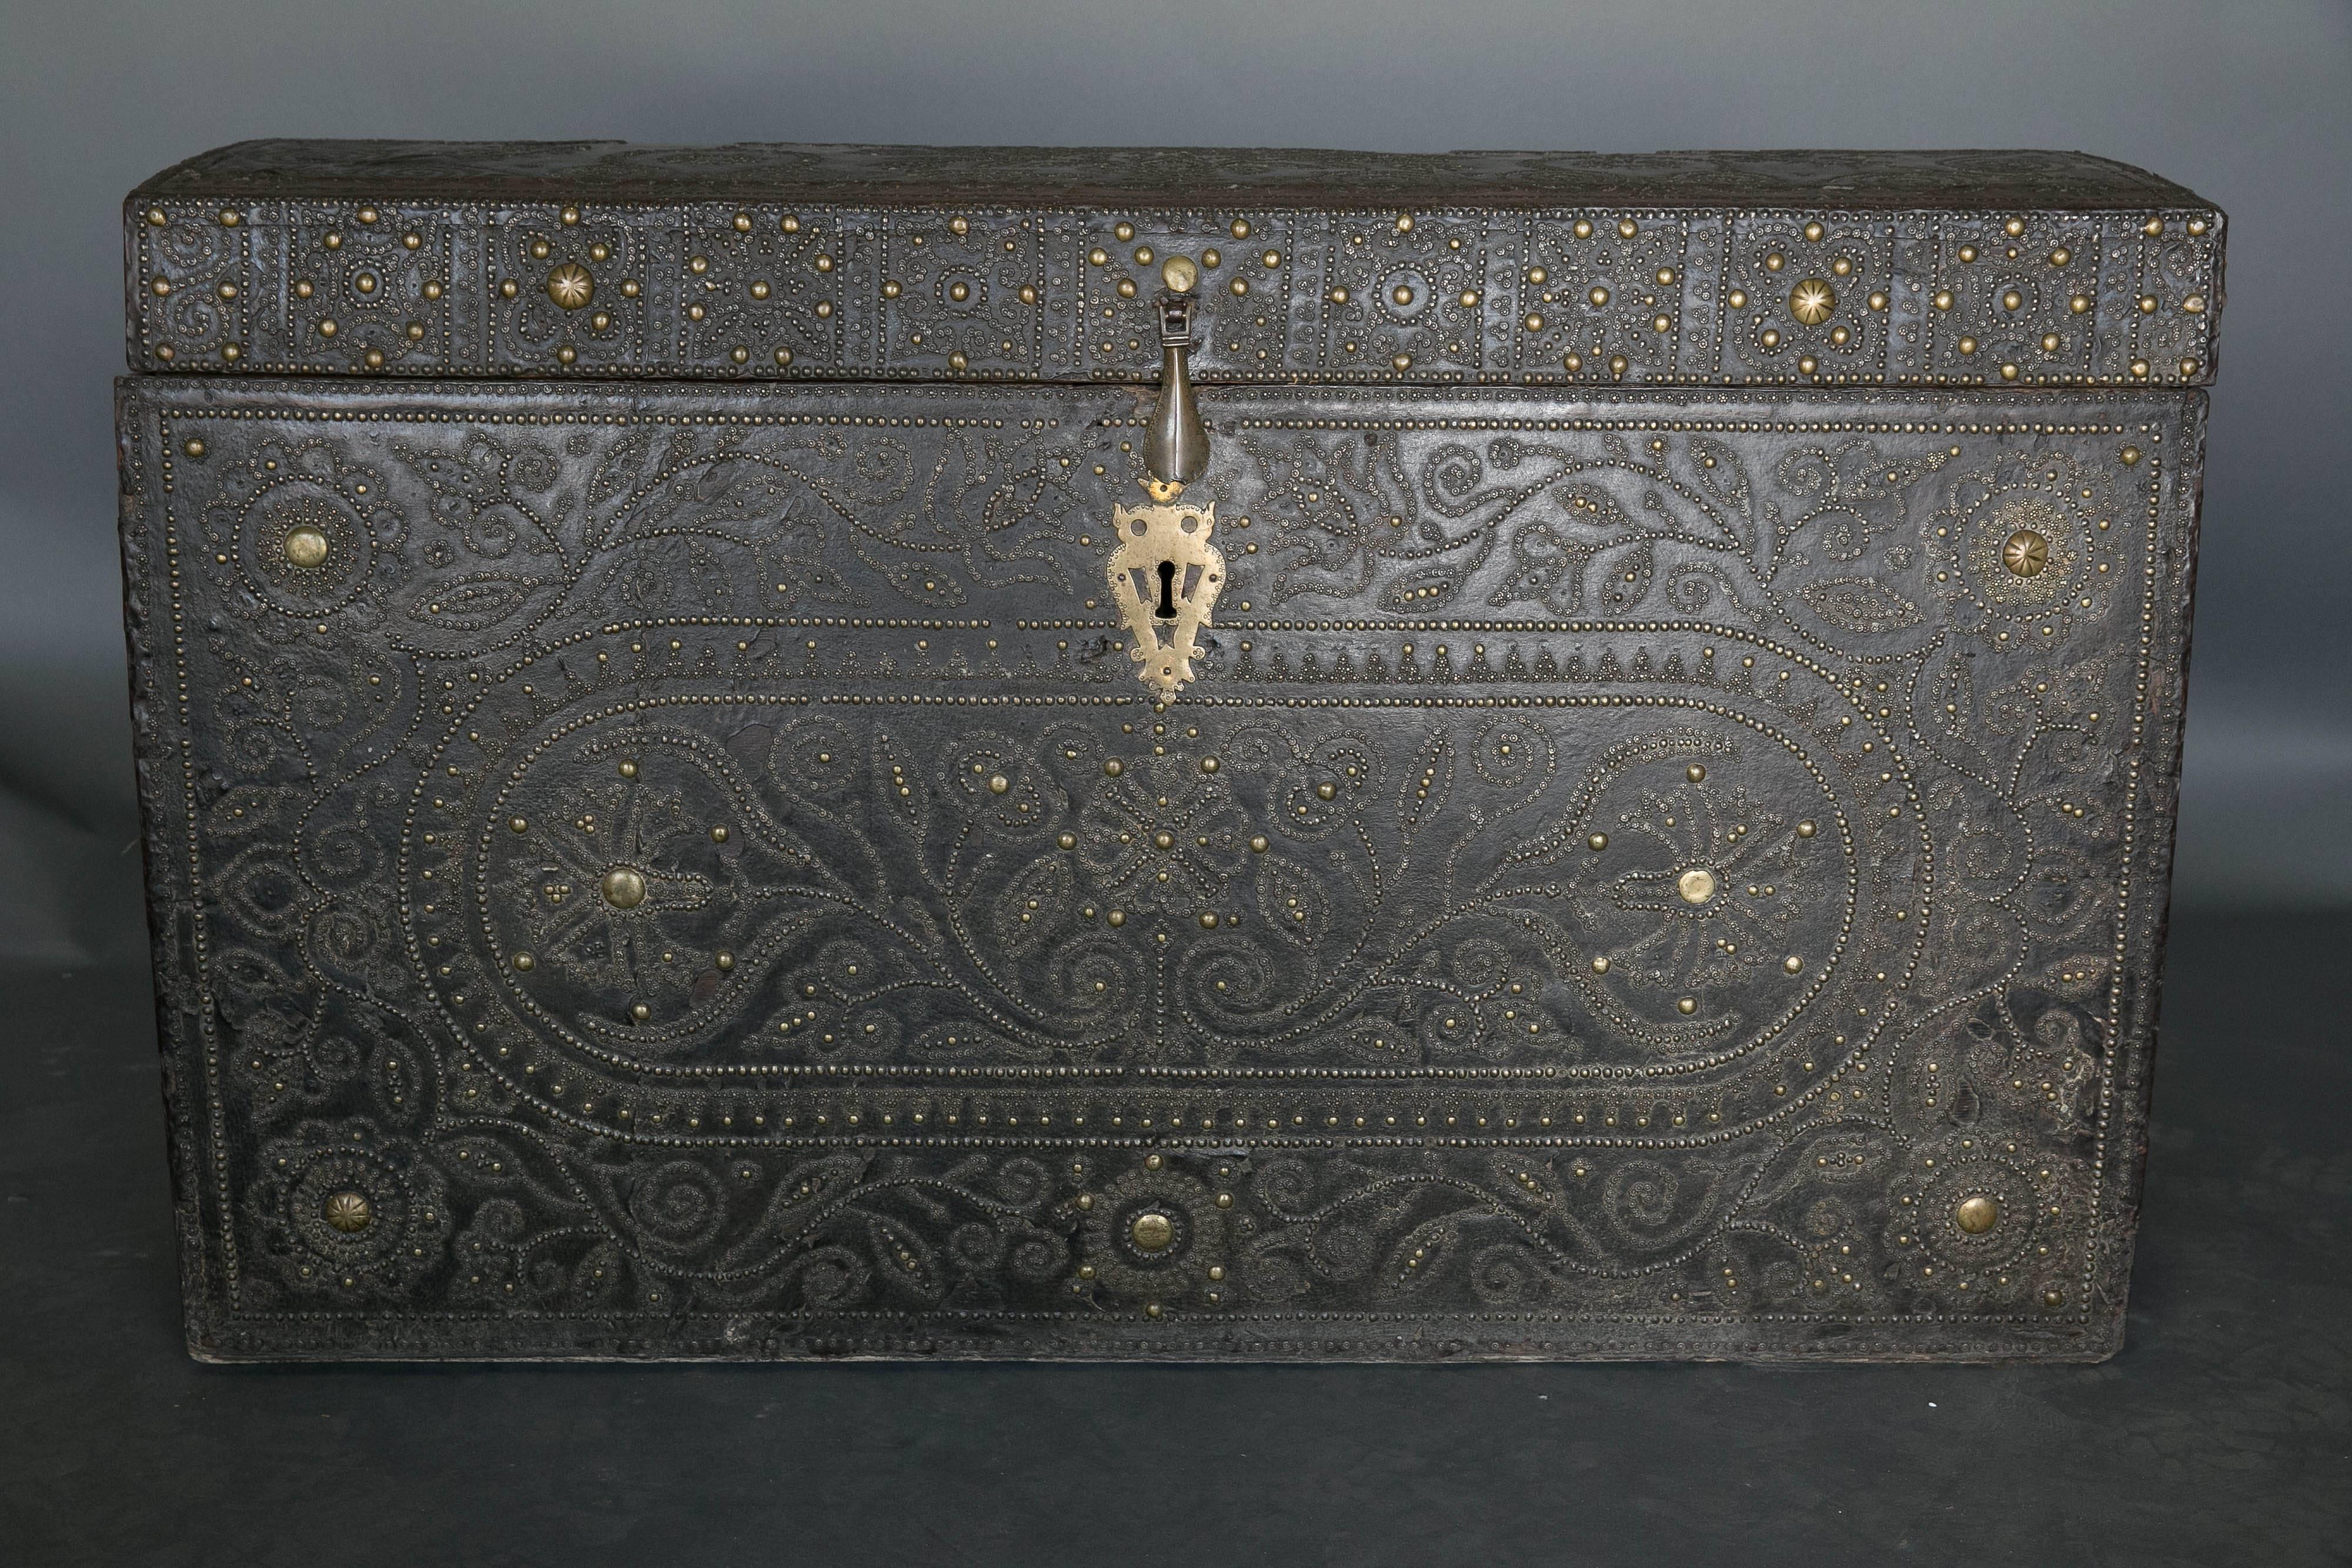 Large antique 18th century Spanish leather studded trunk used by the church due to the inscription of IHS on the top of the trunk. Spectacular workmanship and design. Intricate design on top and front of chest.